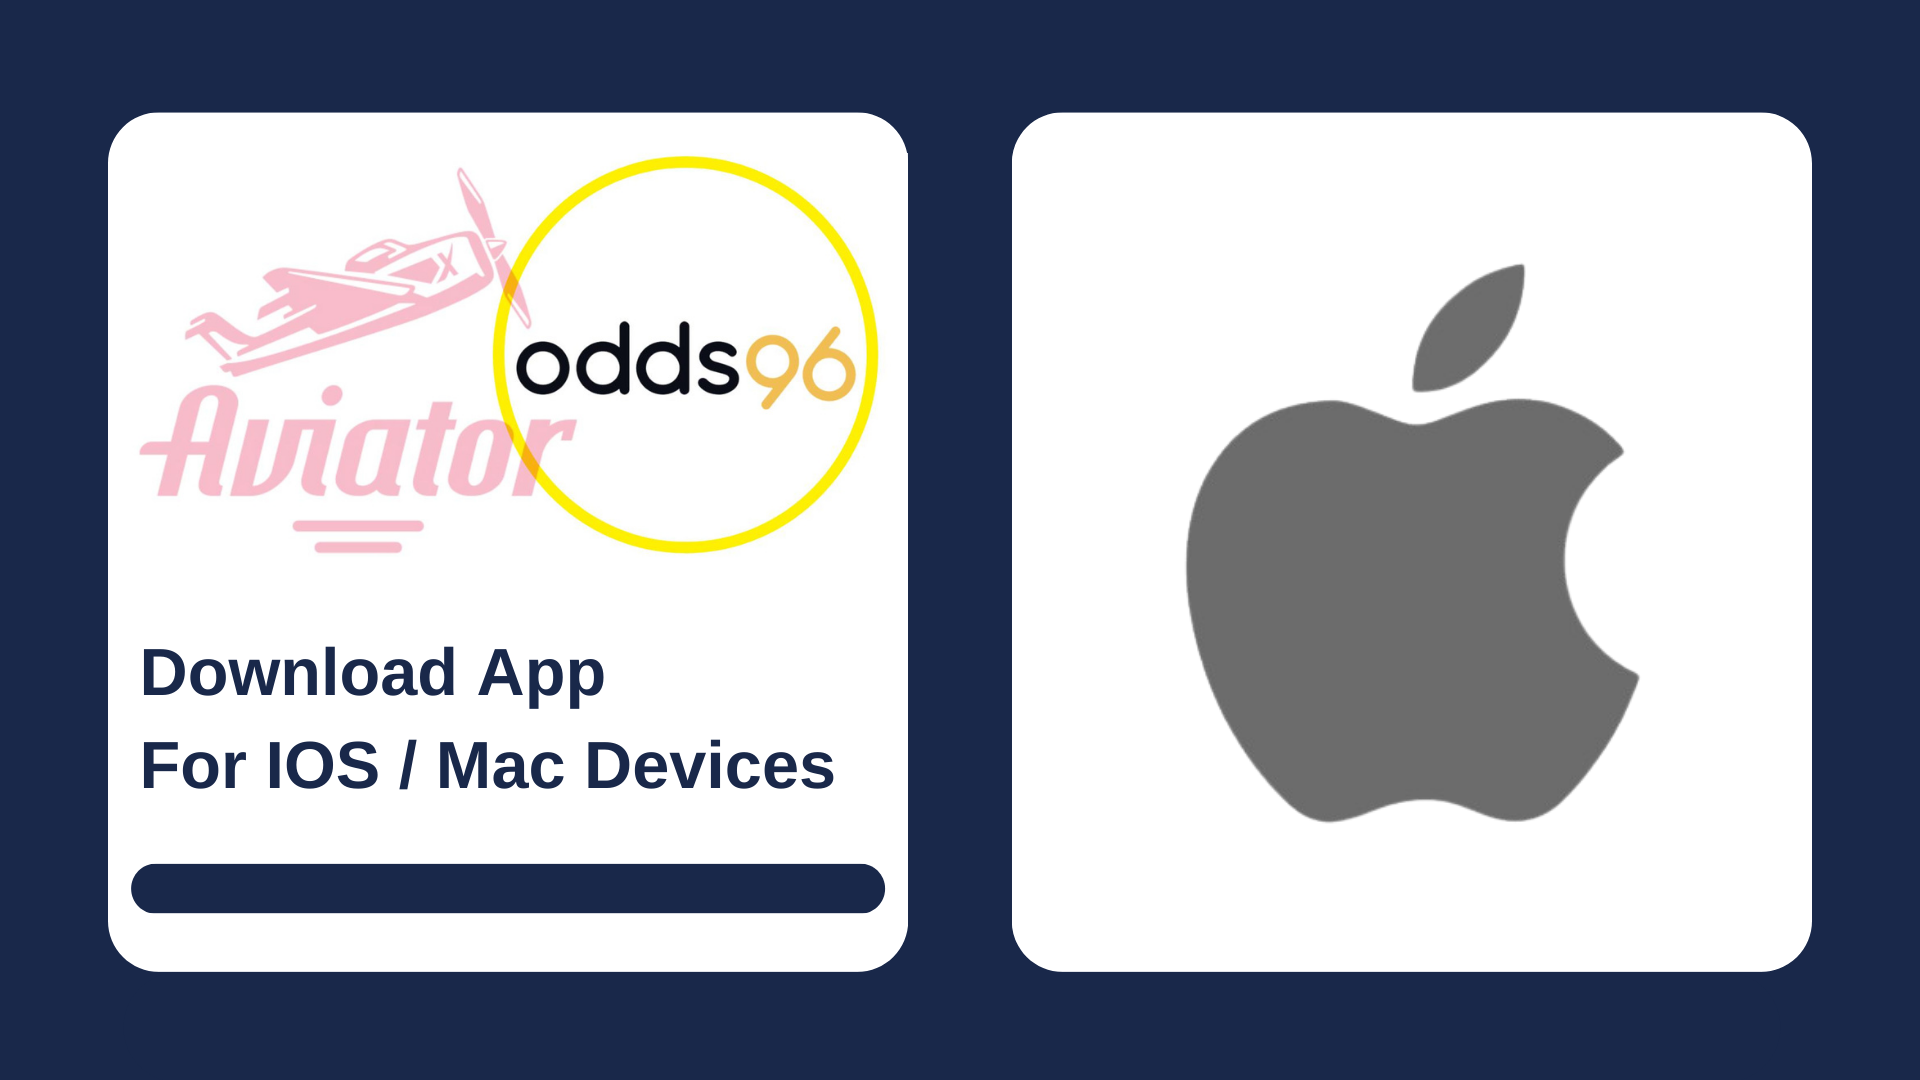 First picture showing Aviator and Odds96 logos with text, and second - IOS icon